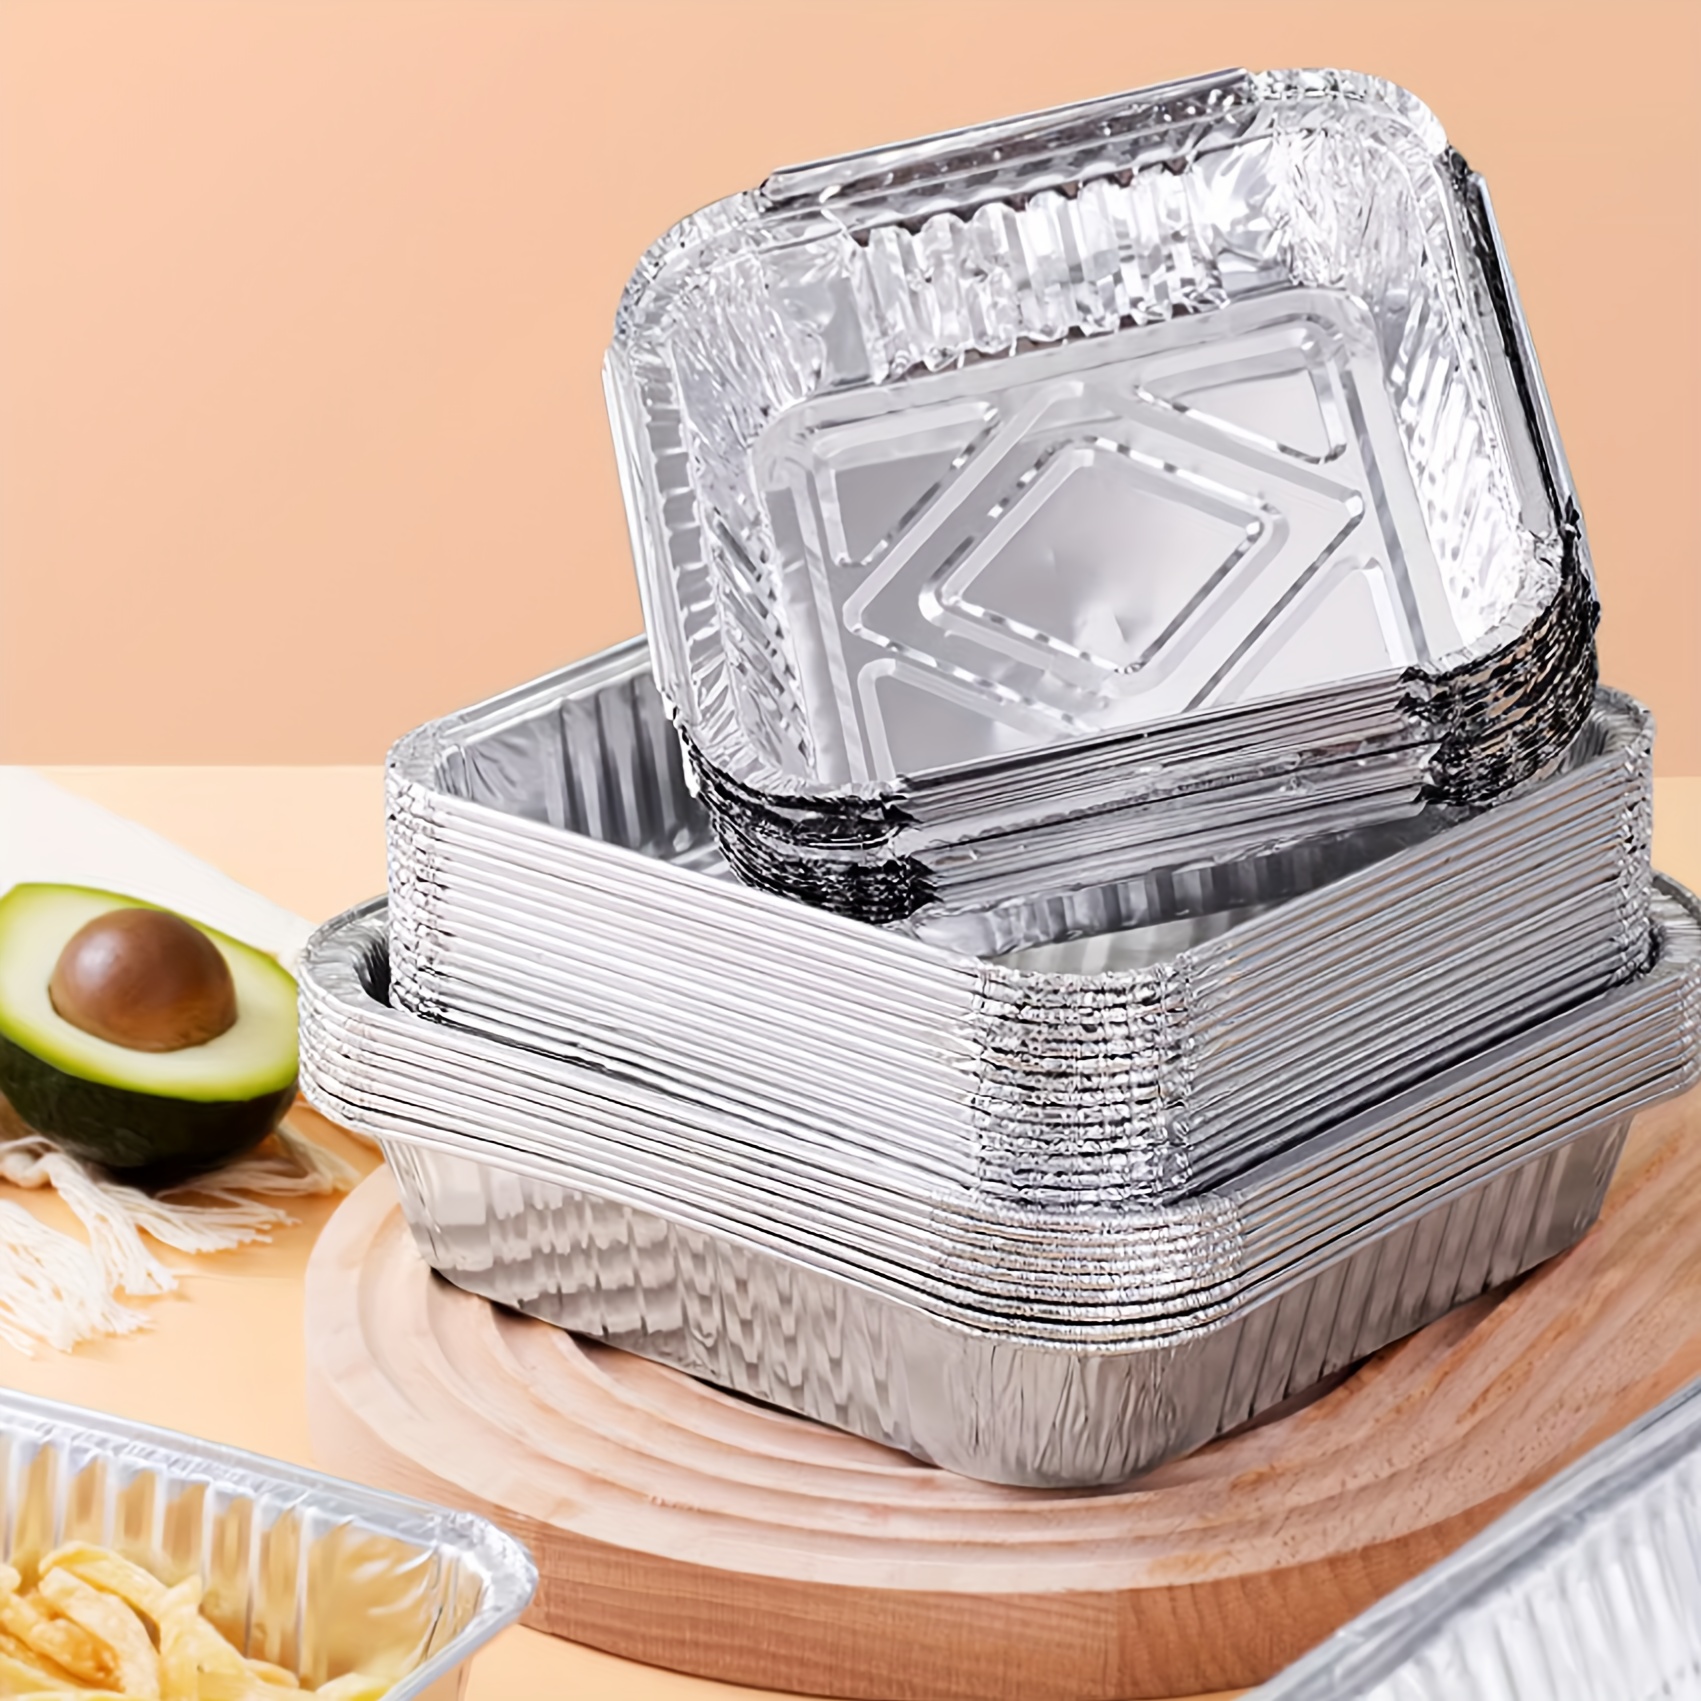 lsshao Aluminum Pans 8x8 Disposable Foil Pans (25 Pack) - 8 Inch Square  Baking Cake Pans - Tin Foil Pans Food Containers Great for Cooking,  Heating, Storing, Prepping Food - Yahoo Shopping